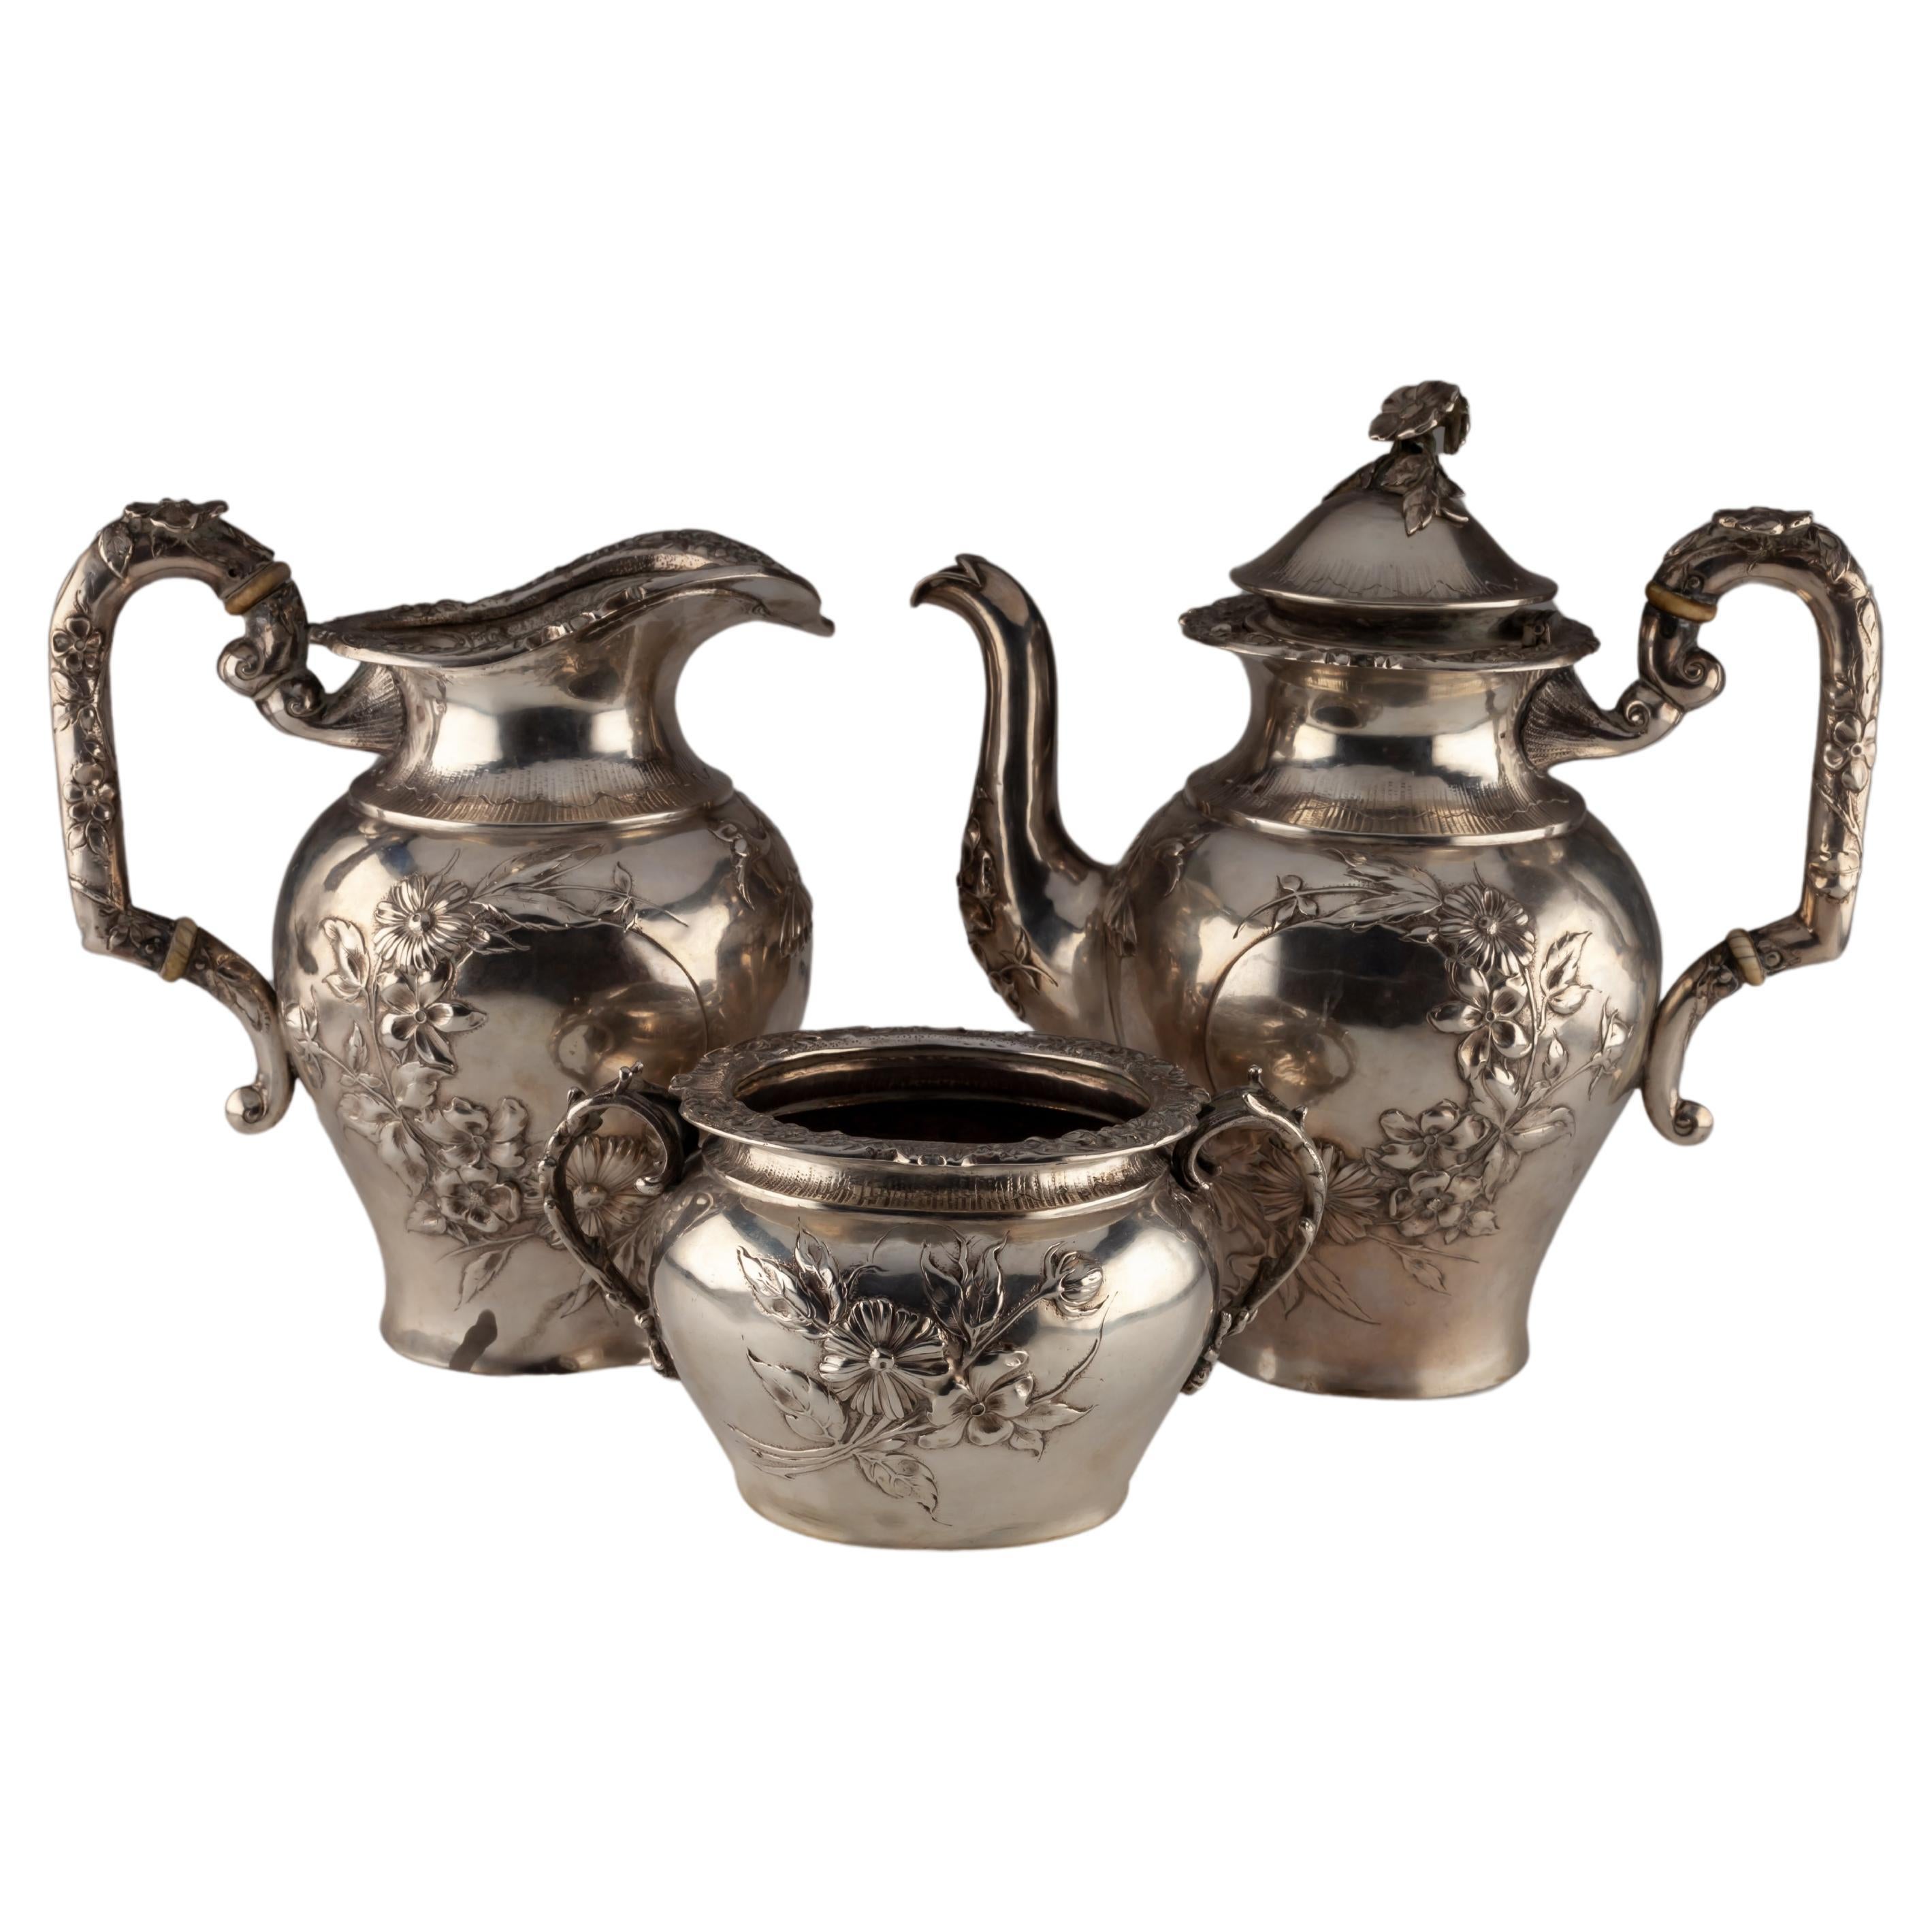 Ornate Sterling Silver British Tea/Coffee Set 1930s Hand-Chased For Sale